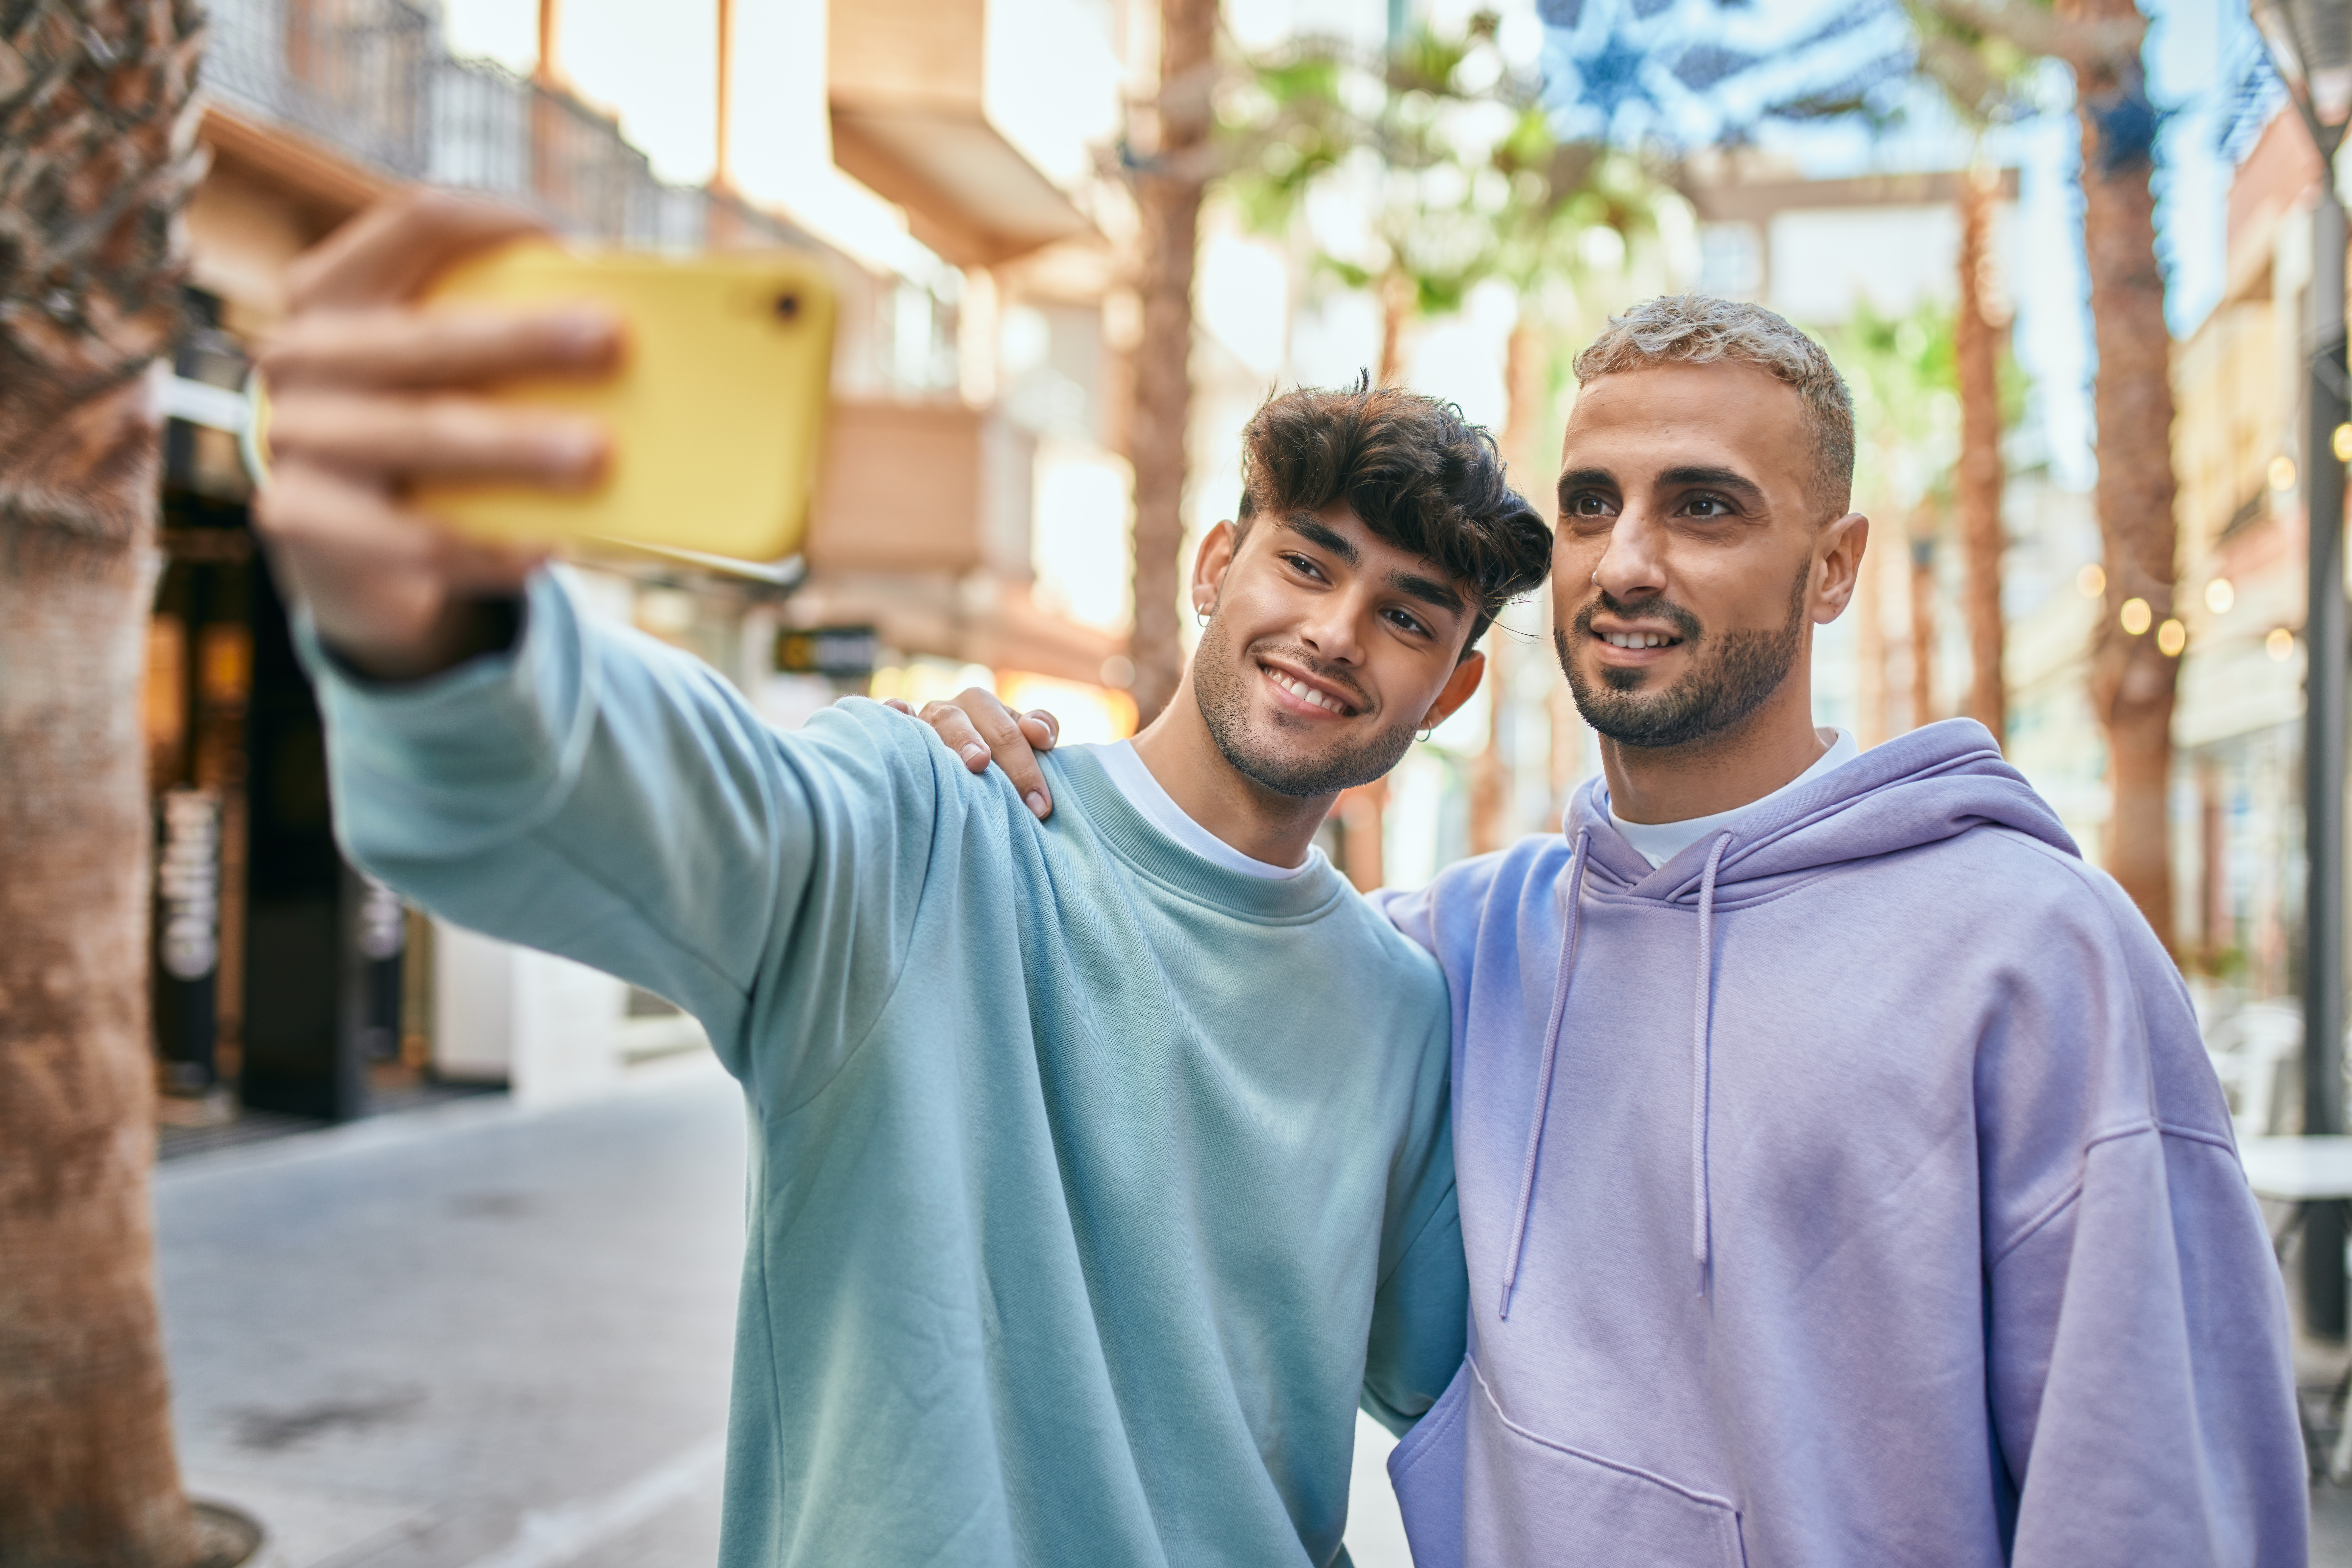 Two young men taking a photo together | Source: Shutterstock